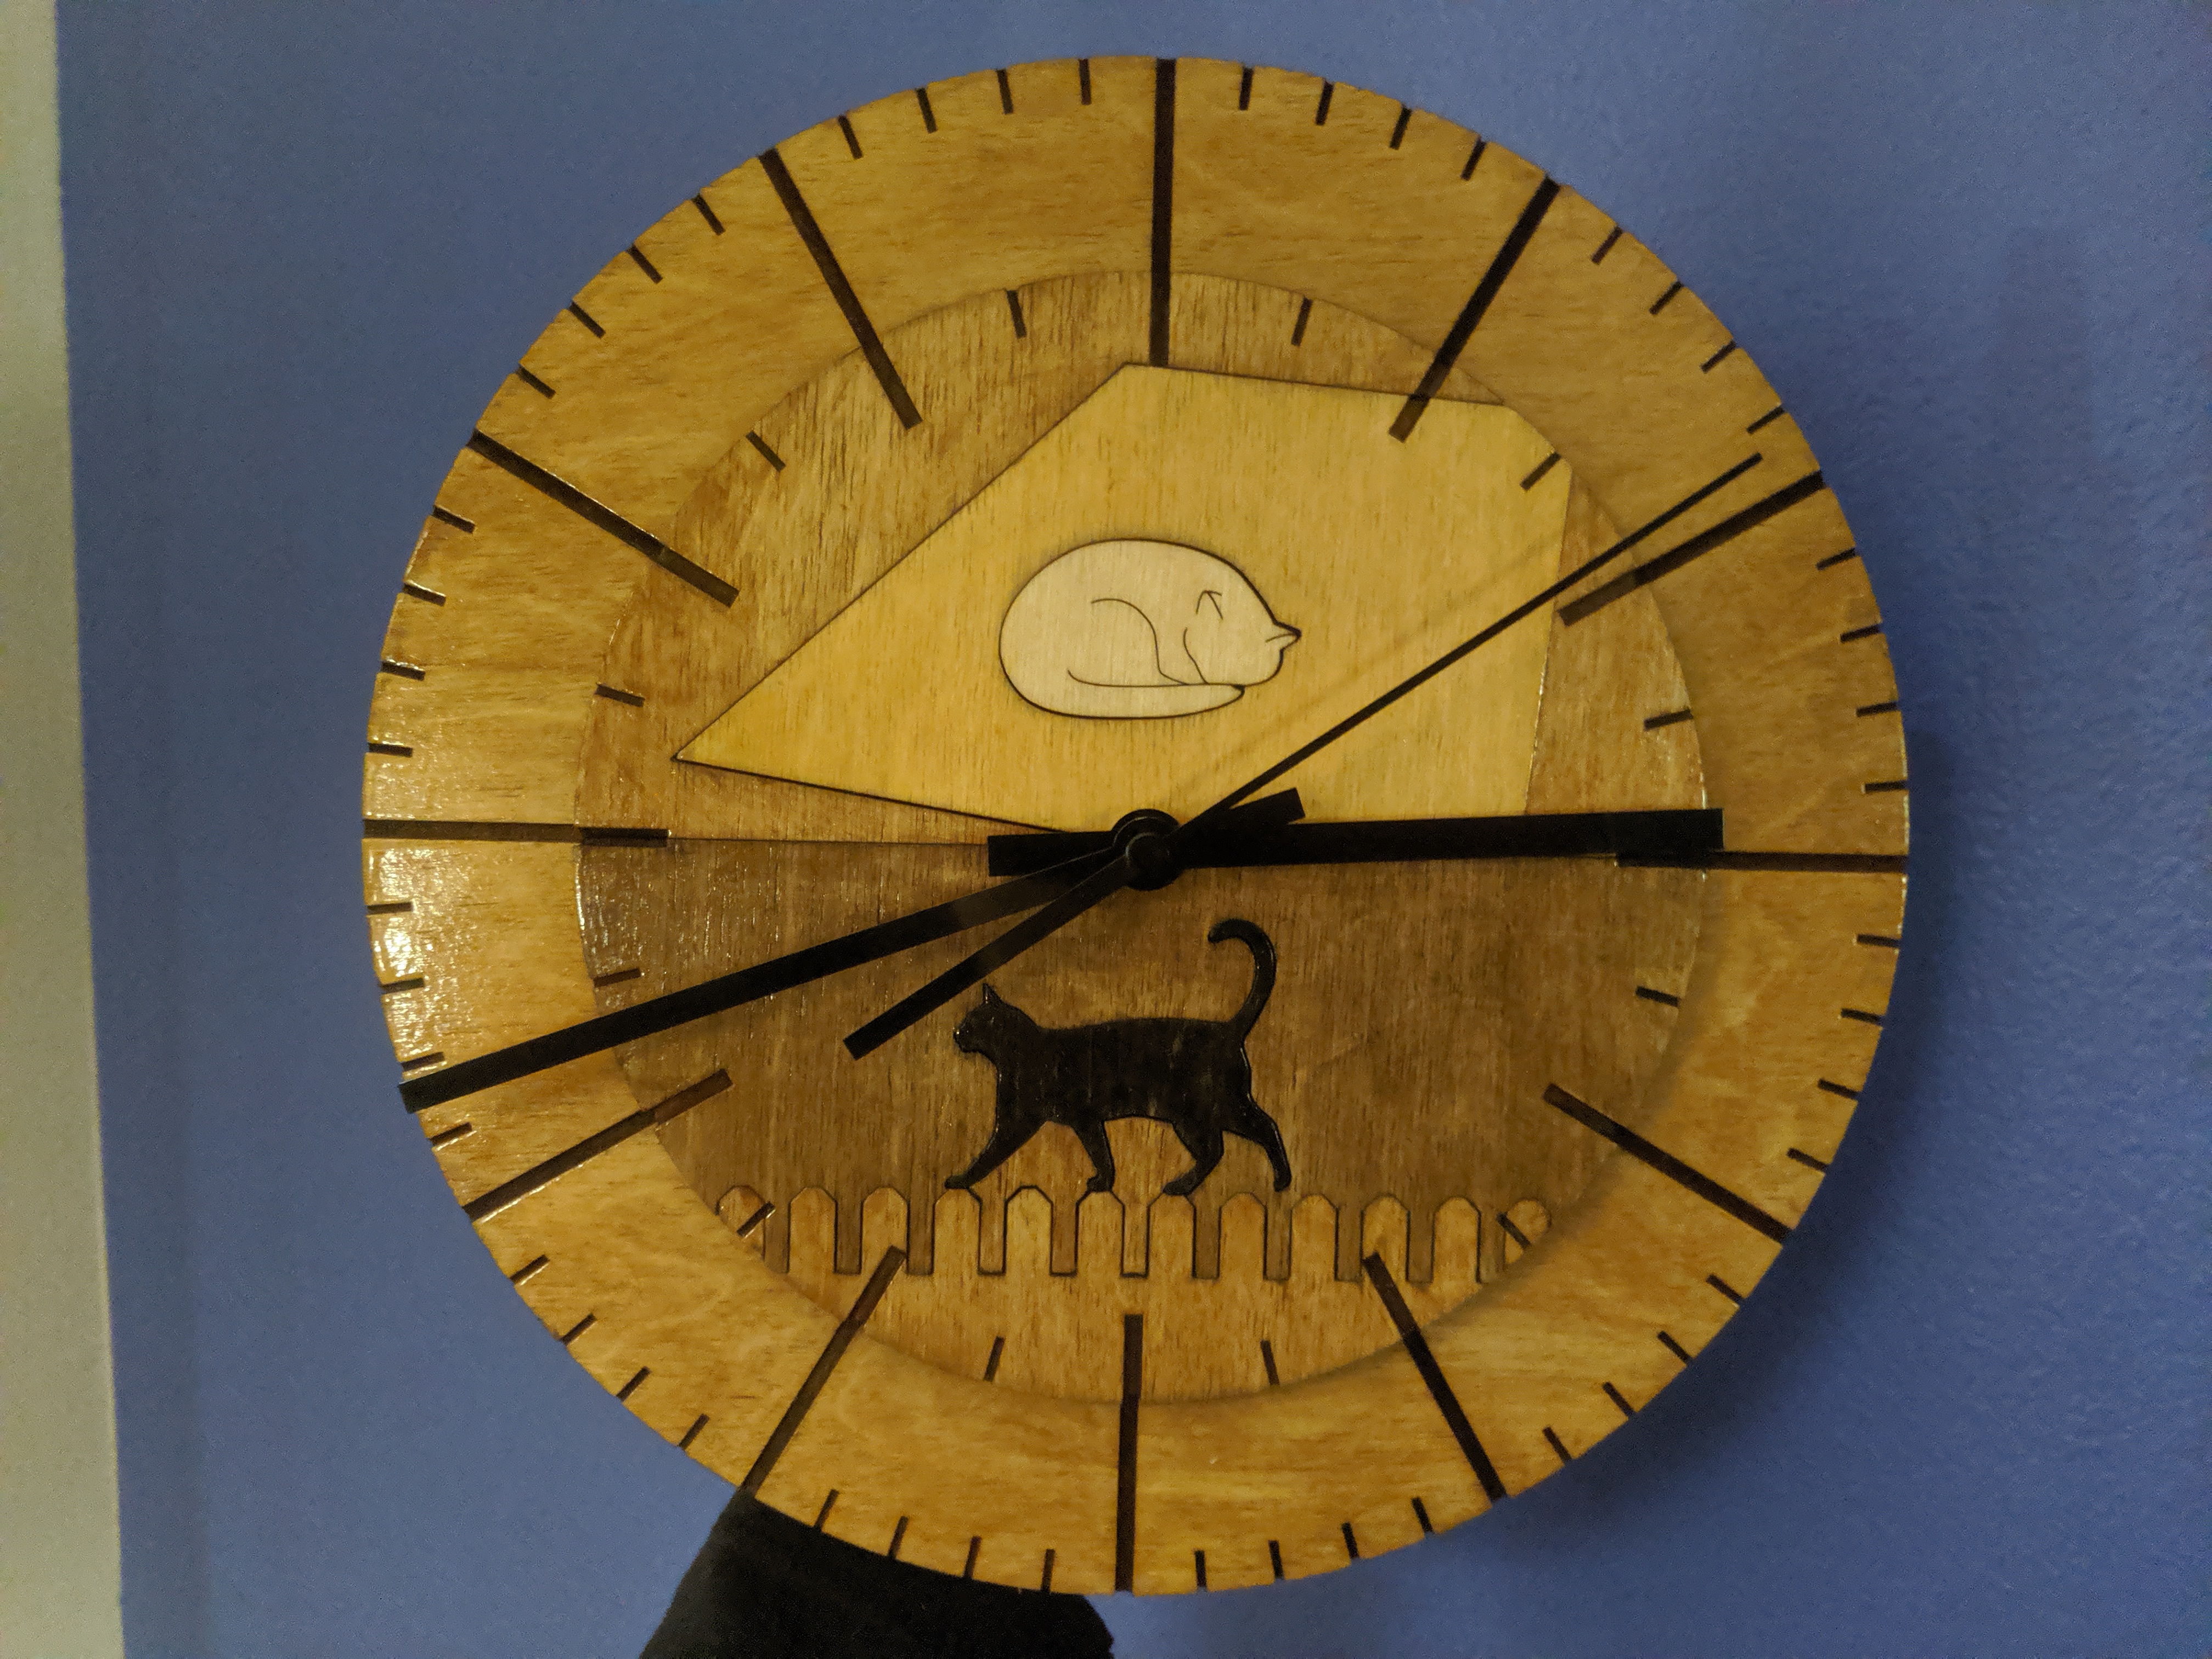 completed cat clock